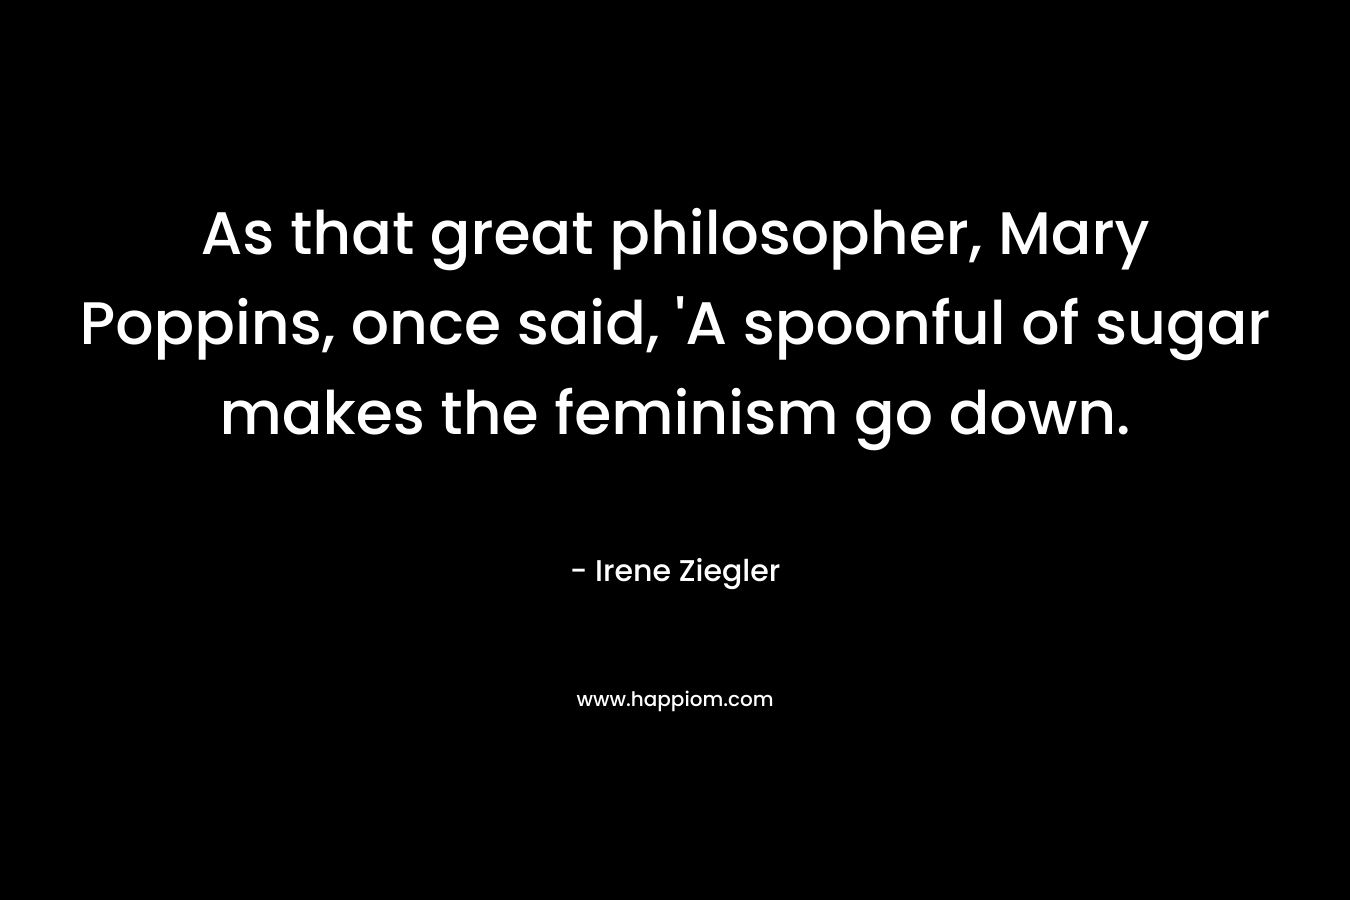 As that great philosopher, Mary Poppins, once said, 'A spoonful of sugar makes the feminism go down.